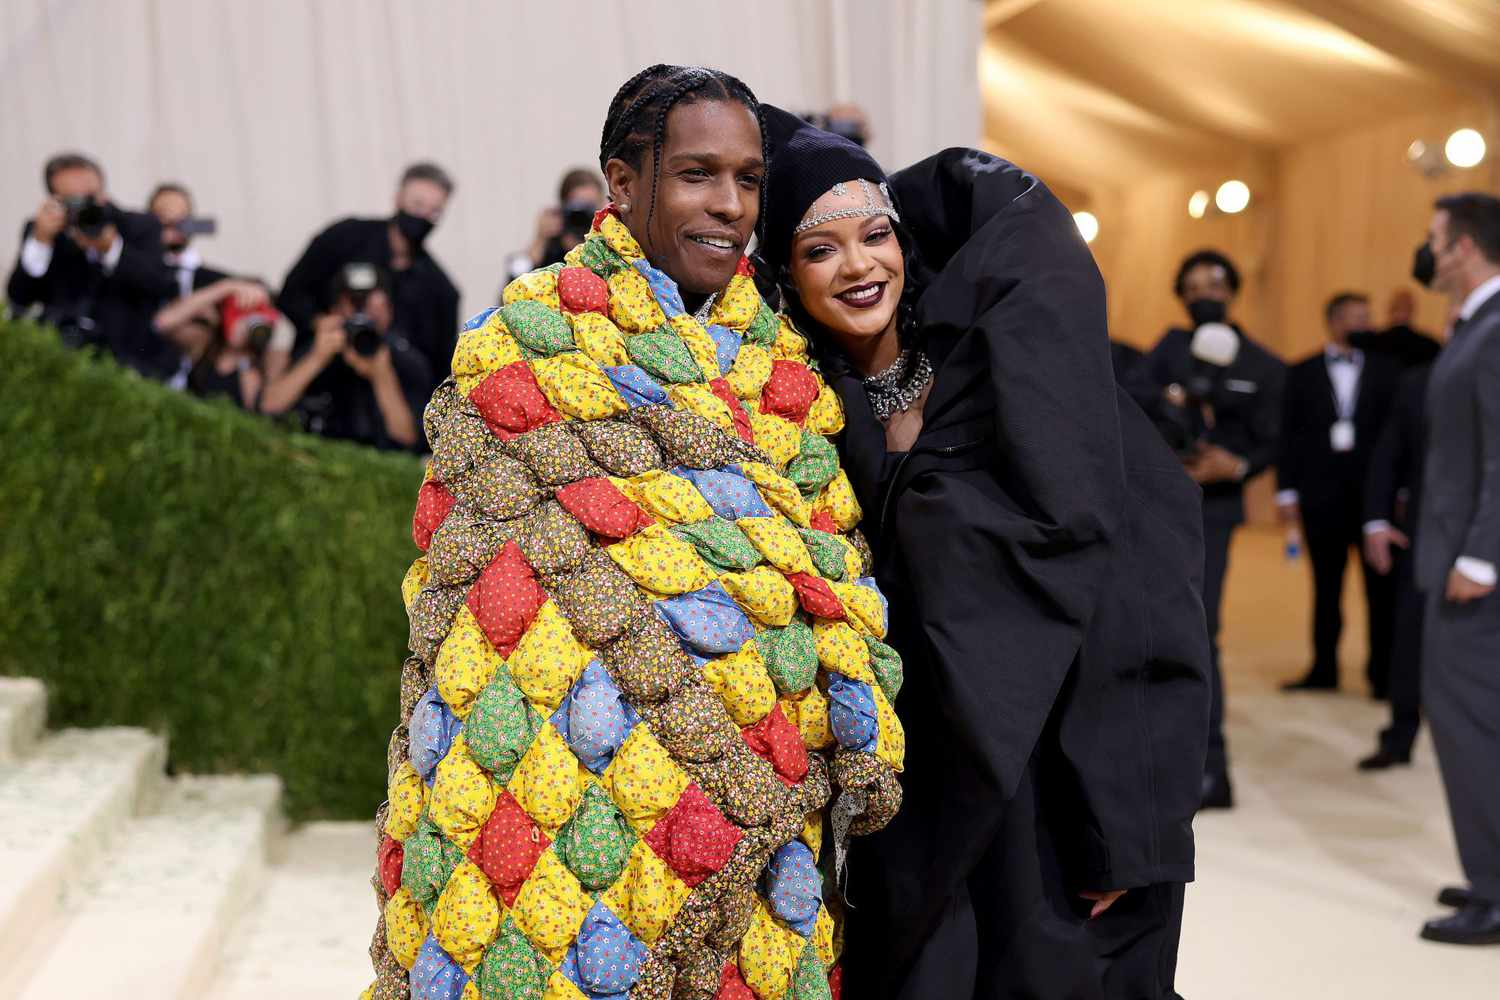 Rihanna and A$AP Rocky at the Met Gala